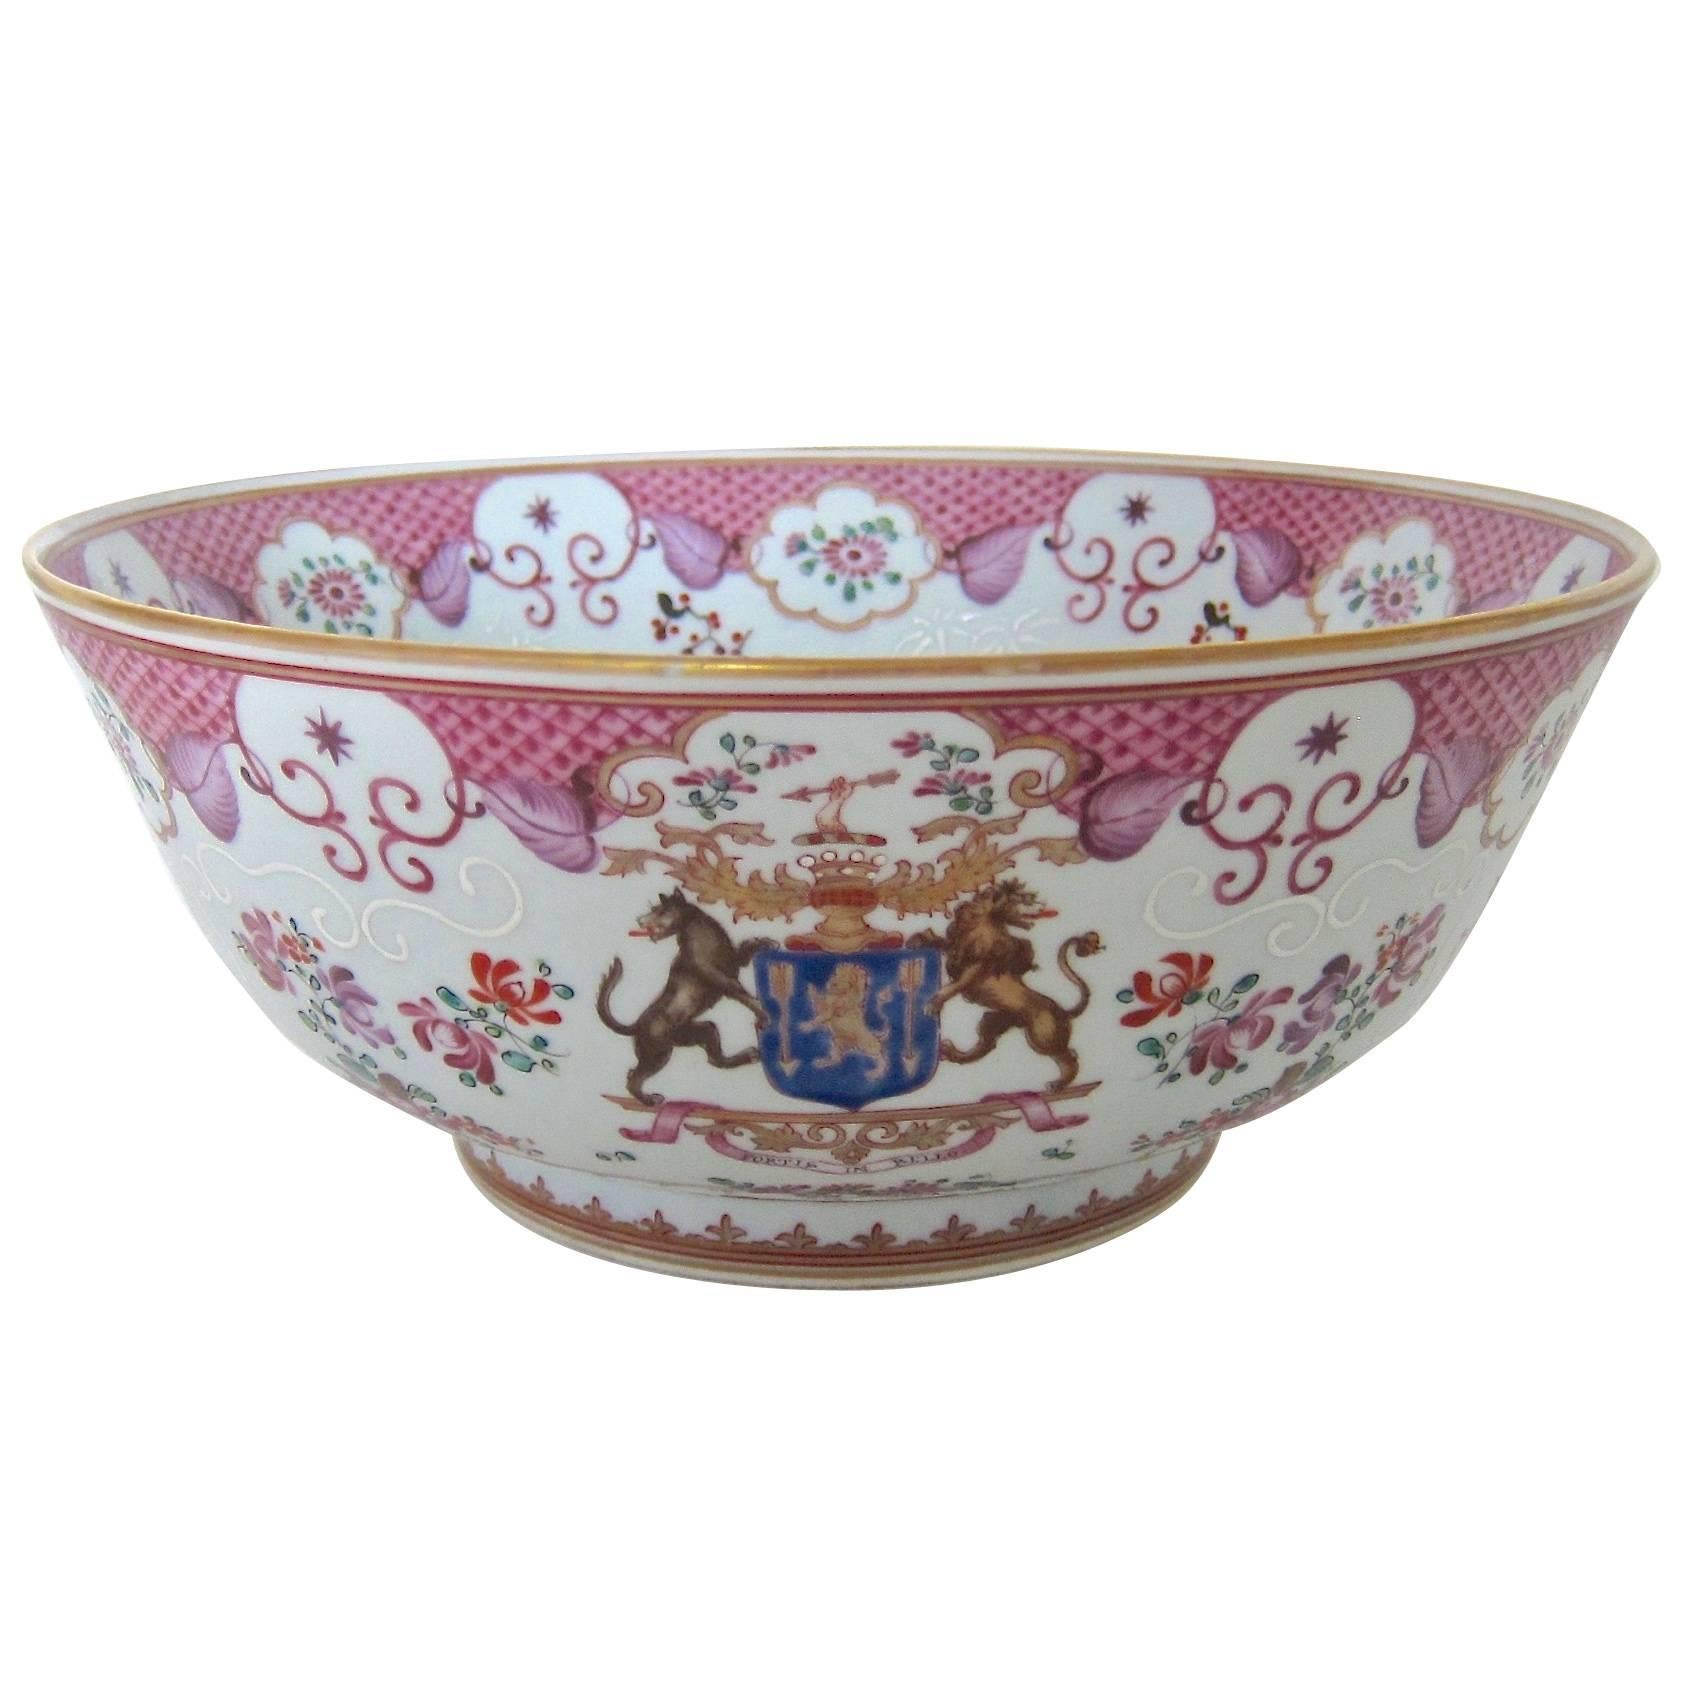 Chinese Export Armorial Style Porcelain Punch Bowl by Samson, Late 19th Century